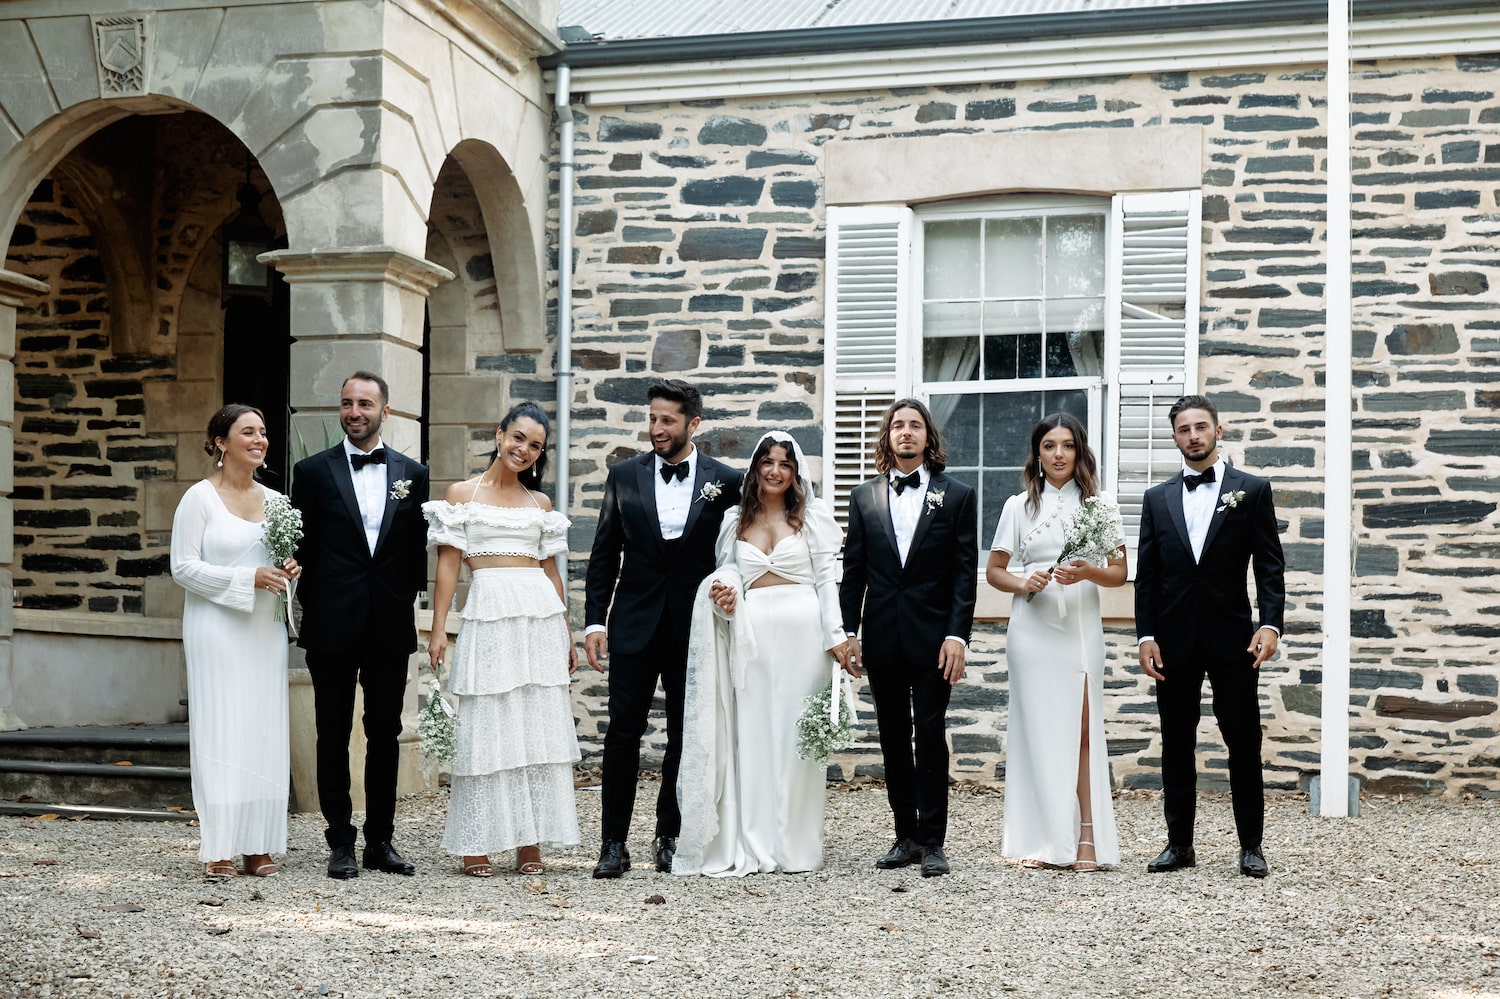 Bridal party outside the brick building at Waverly Estate